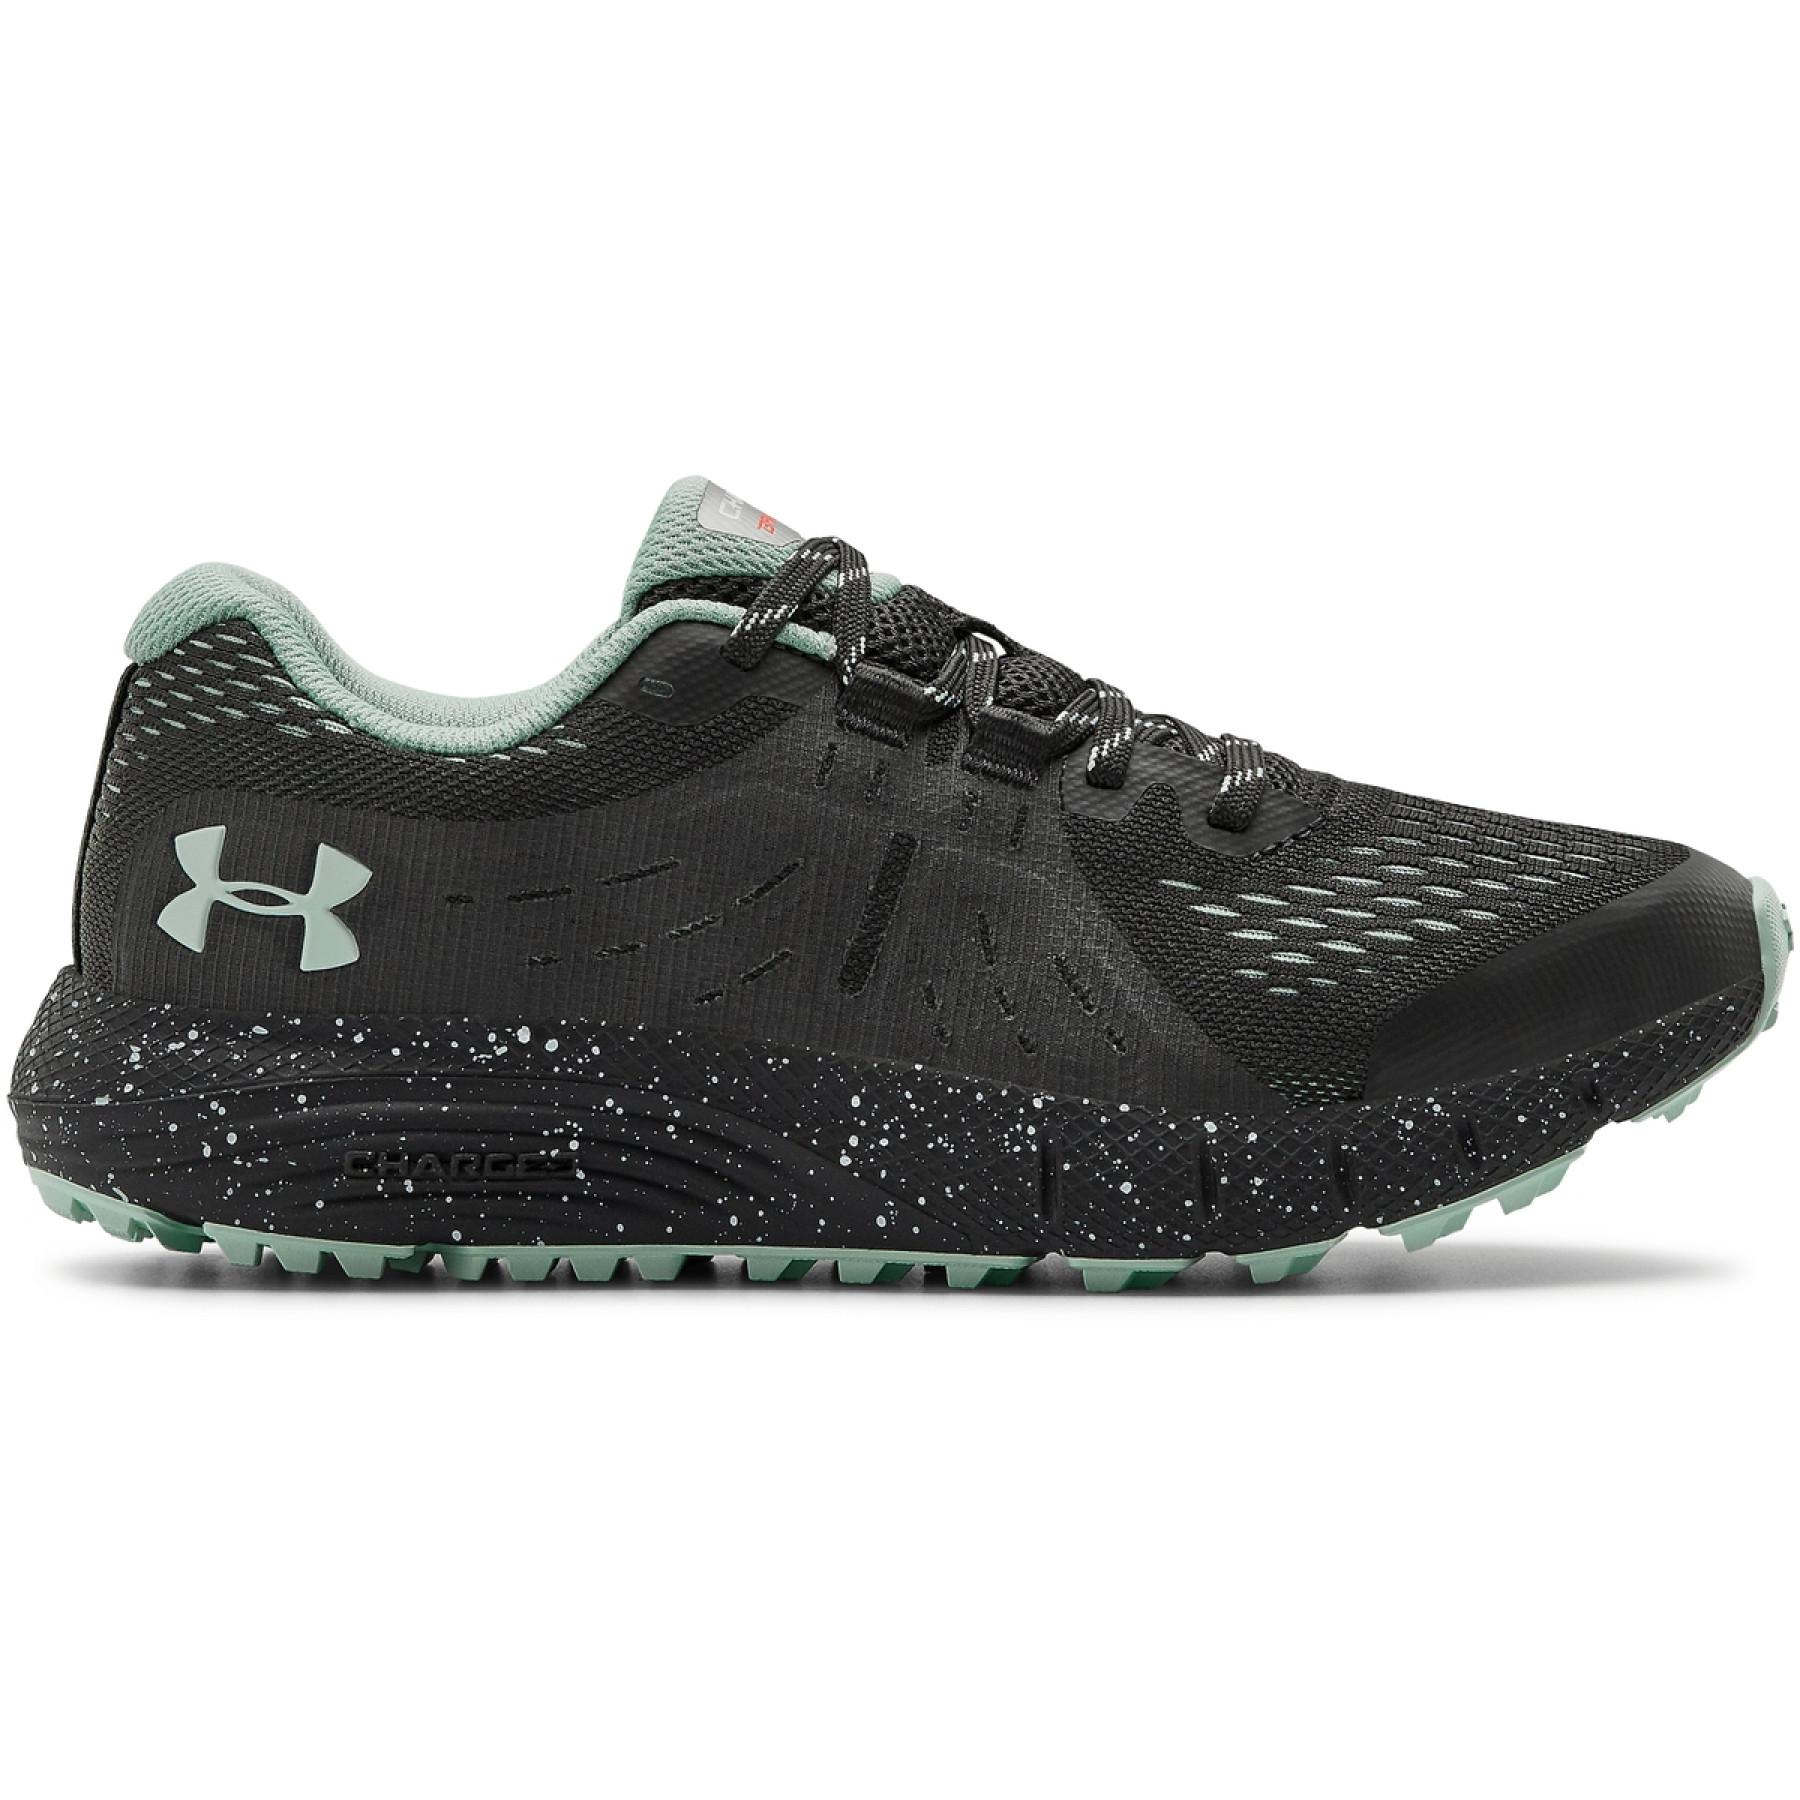 Women's running shoes Under Armour Charged Bandit Trail